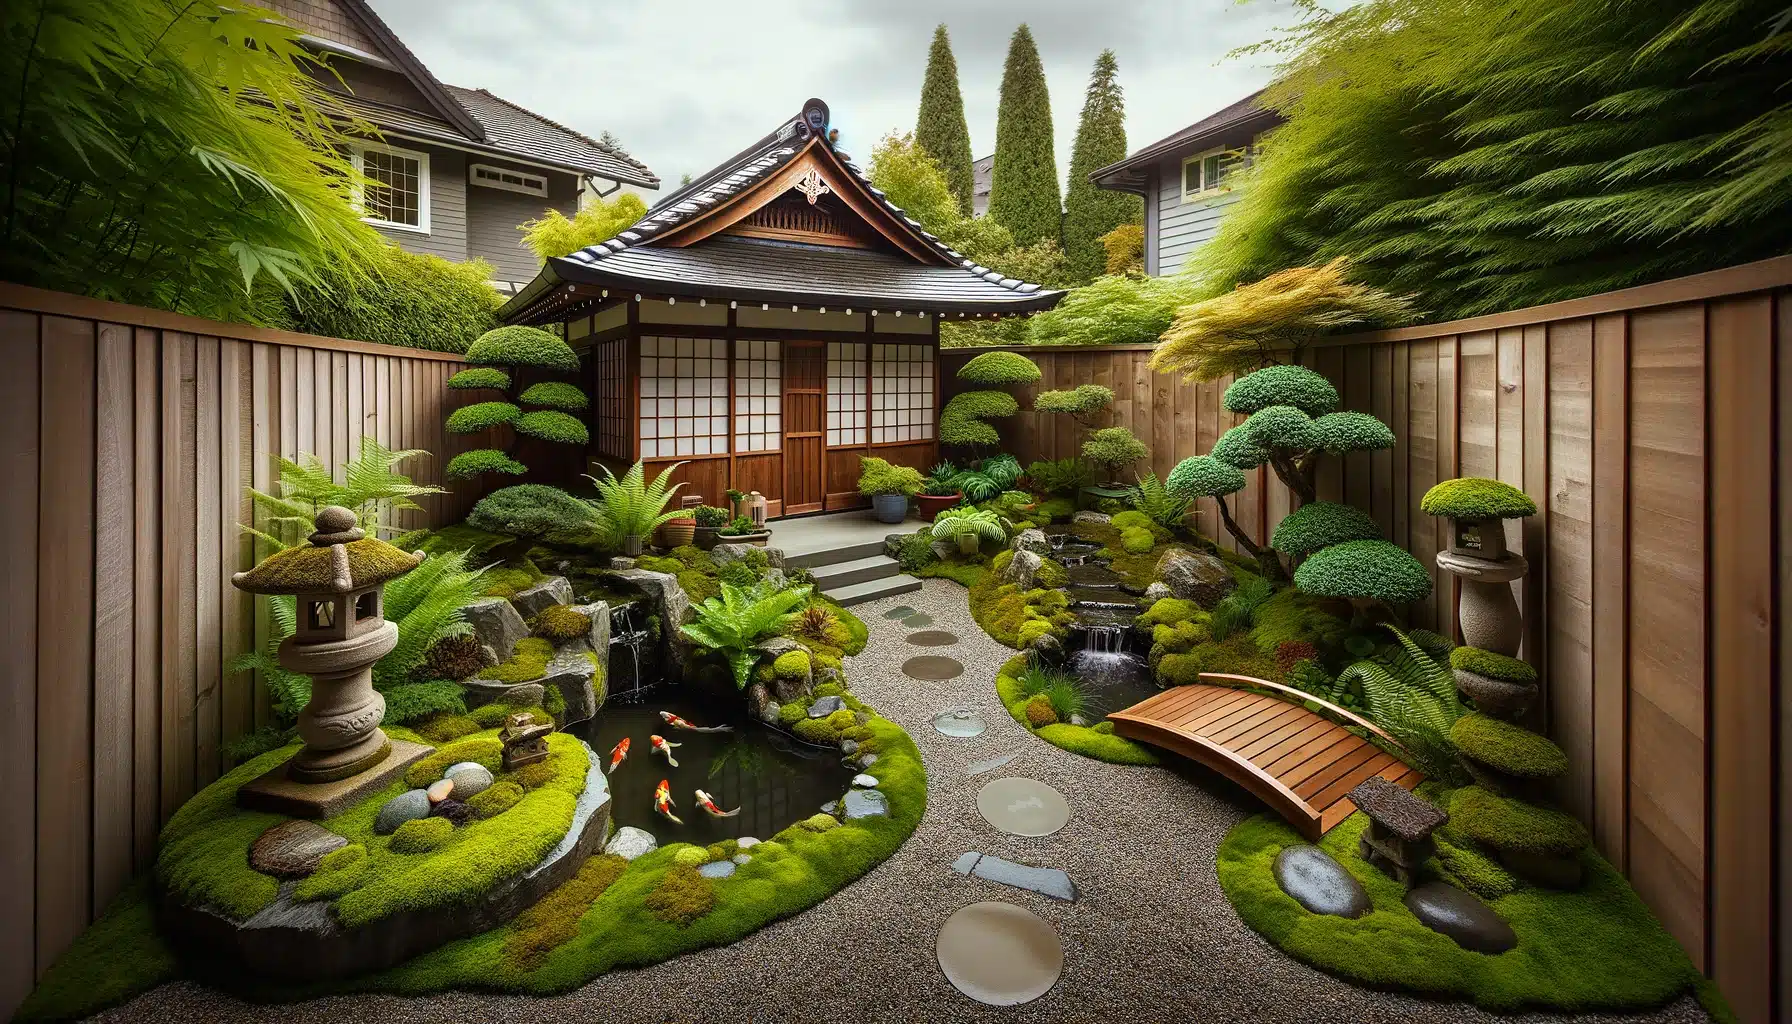 The image depicts a tranquil Japanese-style courtyard garden designed for a suburban American home setting. It showcases a small, clear koi pond centered in the garden, over which stretches a quaint wooden bridge. Around the pond, an assortment of bonsai trees are carefully arranged, adding a miniature, yet mature landscape element to the scene. A classic stone lantern stands near the path, offering a touch of elegance and tradition. The gravel path meanders through the garden, inviting visitors to explore and enjoy the serene environment. Moss and ferns are sprinkled throughout, enhancing the lushness and greenery of the space. The garden is enclosed by a low, unobtrusive wooden fence, integrating the garden seamlessly into the suburban surroundings. This setup offers a peaceful retreat, blending the beauty of Japanese garden aesthetics with the familiar comfort of suburban life.